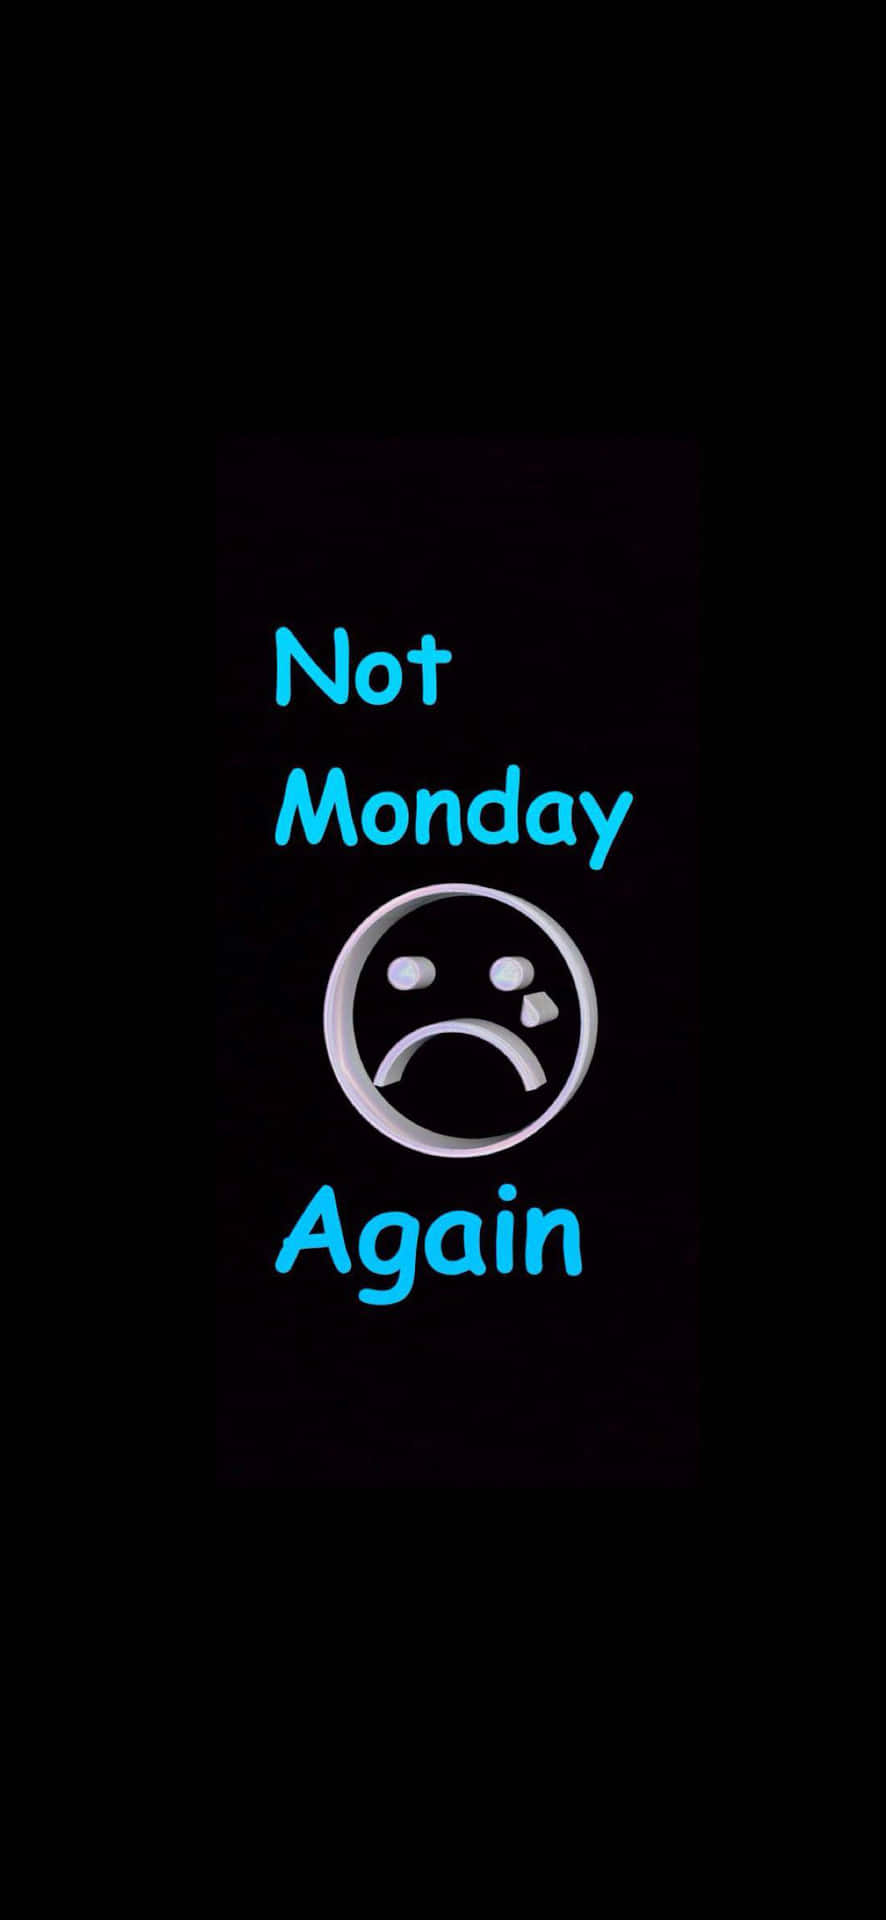 Not Monday Again Sad Face Black Background Picture